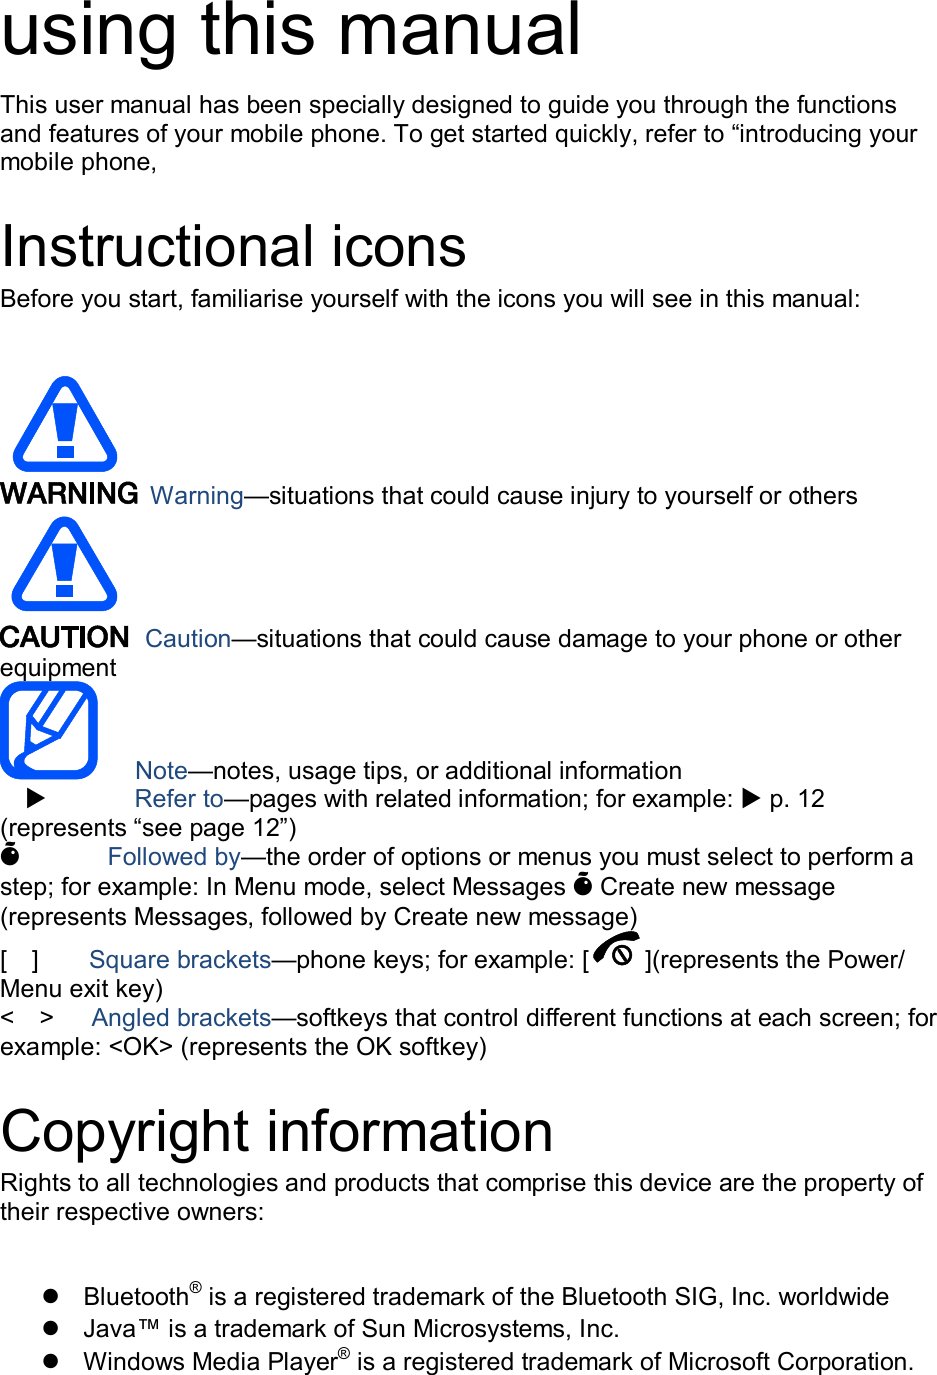 using this manual This user manual has been specially designed to guide you through the functions and features of your mobile phone. To get started quickly, refer to “introducing your mobile phone,  Instructional icons Before you start, familiarise yourself with the icons you will see in this manual:     Warning—situations that could cause injury to yourself or others  Caution—situations that could cause damage to your phone or other equipment    Note—notes, usage tips, or additional information          Refer to—pages with related information; for example:  p. 12 (represents “see page 12”) Õ       Followed by—the order of options or menus you must select to perform a step; for example: In Menu mode, select Messages Õ Create new message (represents Messages, followed by Create new message) [    ]        Square brackets—phone keys; for example: [ ](represents the Power/ Menu exit key) &lt;    &gt;      Angled brackets—softkeys that control different functions at each screen; for example: &lt;OK&gt; (represents the OK softkey)  Copyright information Rights to all technologies and products that comprise this device are the property of their respective owners:    Bluetooth® is a registered trademark of the Bluetooth SIG, Inc. worldwide   Java™ is a trademark of Sun Microsystems, Inc.   Windows Media Player® is a registered trademark of Microsoft Corporation. 